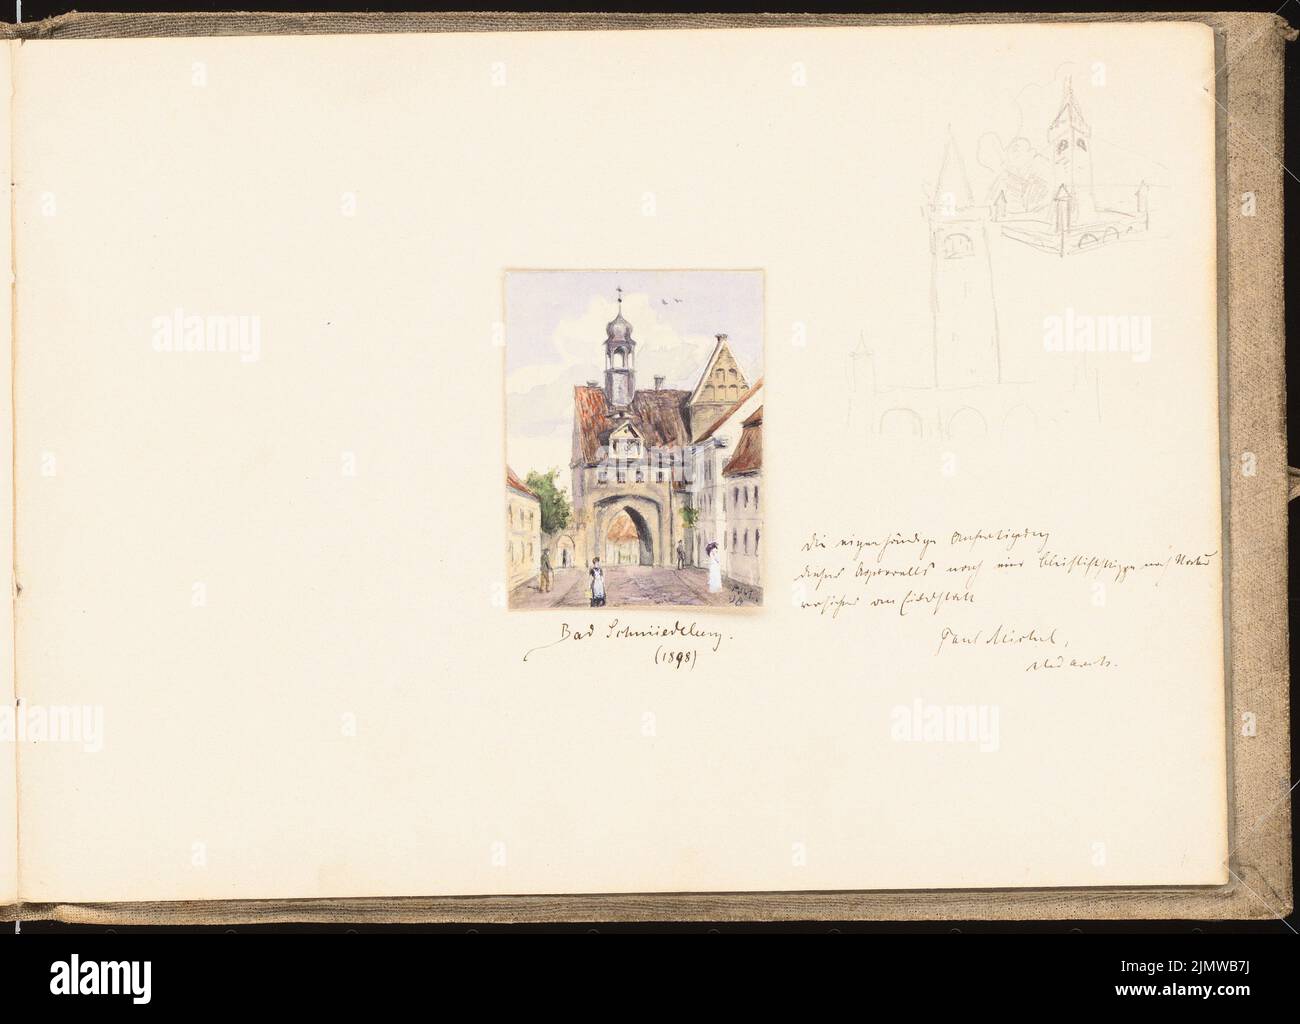 Michel Paul sen. (1877-1938), sketchbook. 1899 (July 23, 1899): Torhaus in Bad Schmiedeberg, perspective view, 2 views of a monument. Pencil watercolored, white heighted on cardboard; Pencil on paper, 18.6 x 25.9 cm (including scan edges) Michel Paul sen.  (1877-1938): Skizzenbuch. 1899 Stock Photo